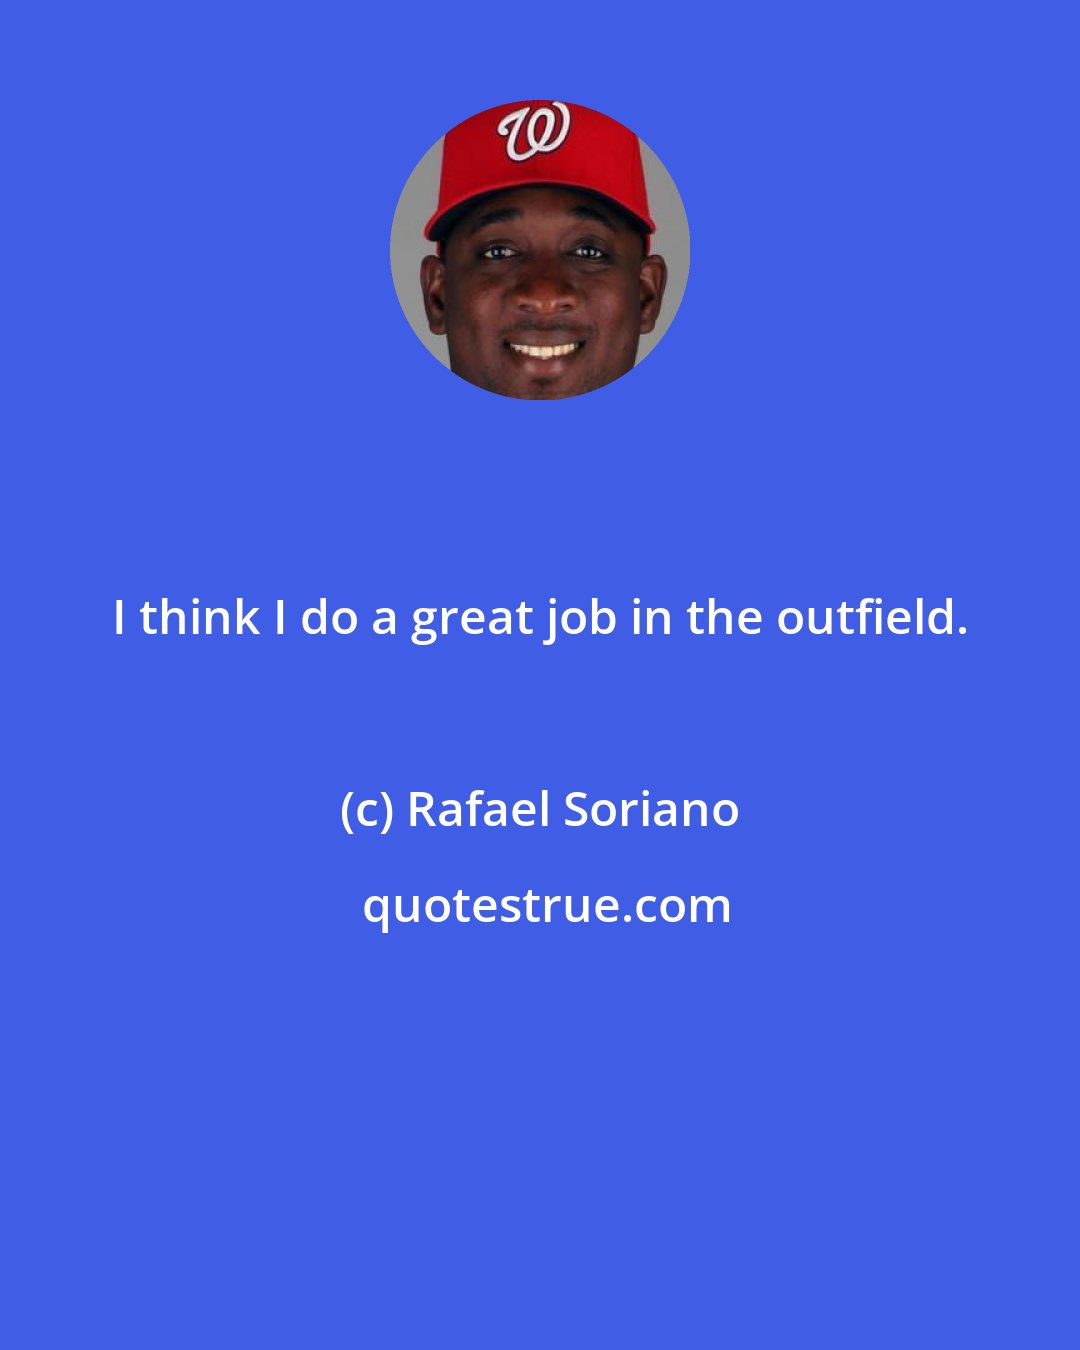 Rafael Soriano: I think I do a great job in the outfield.